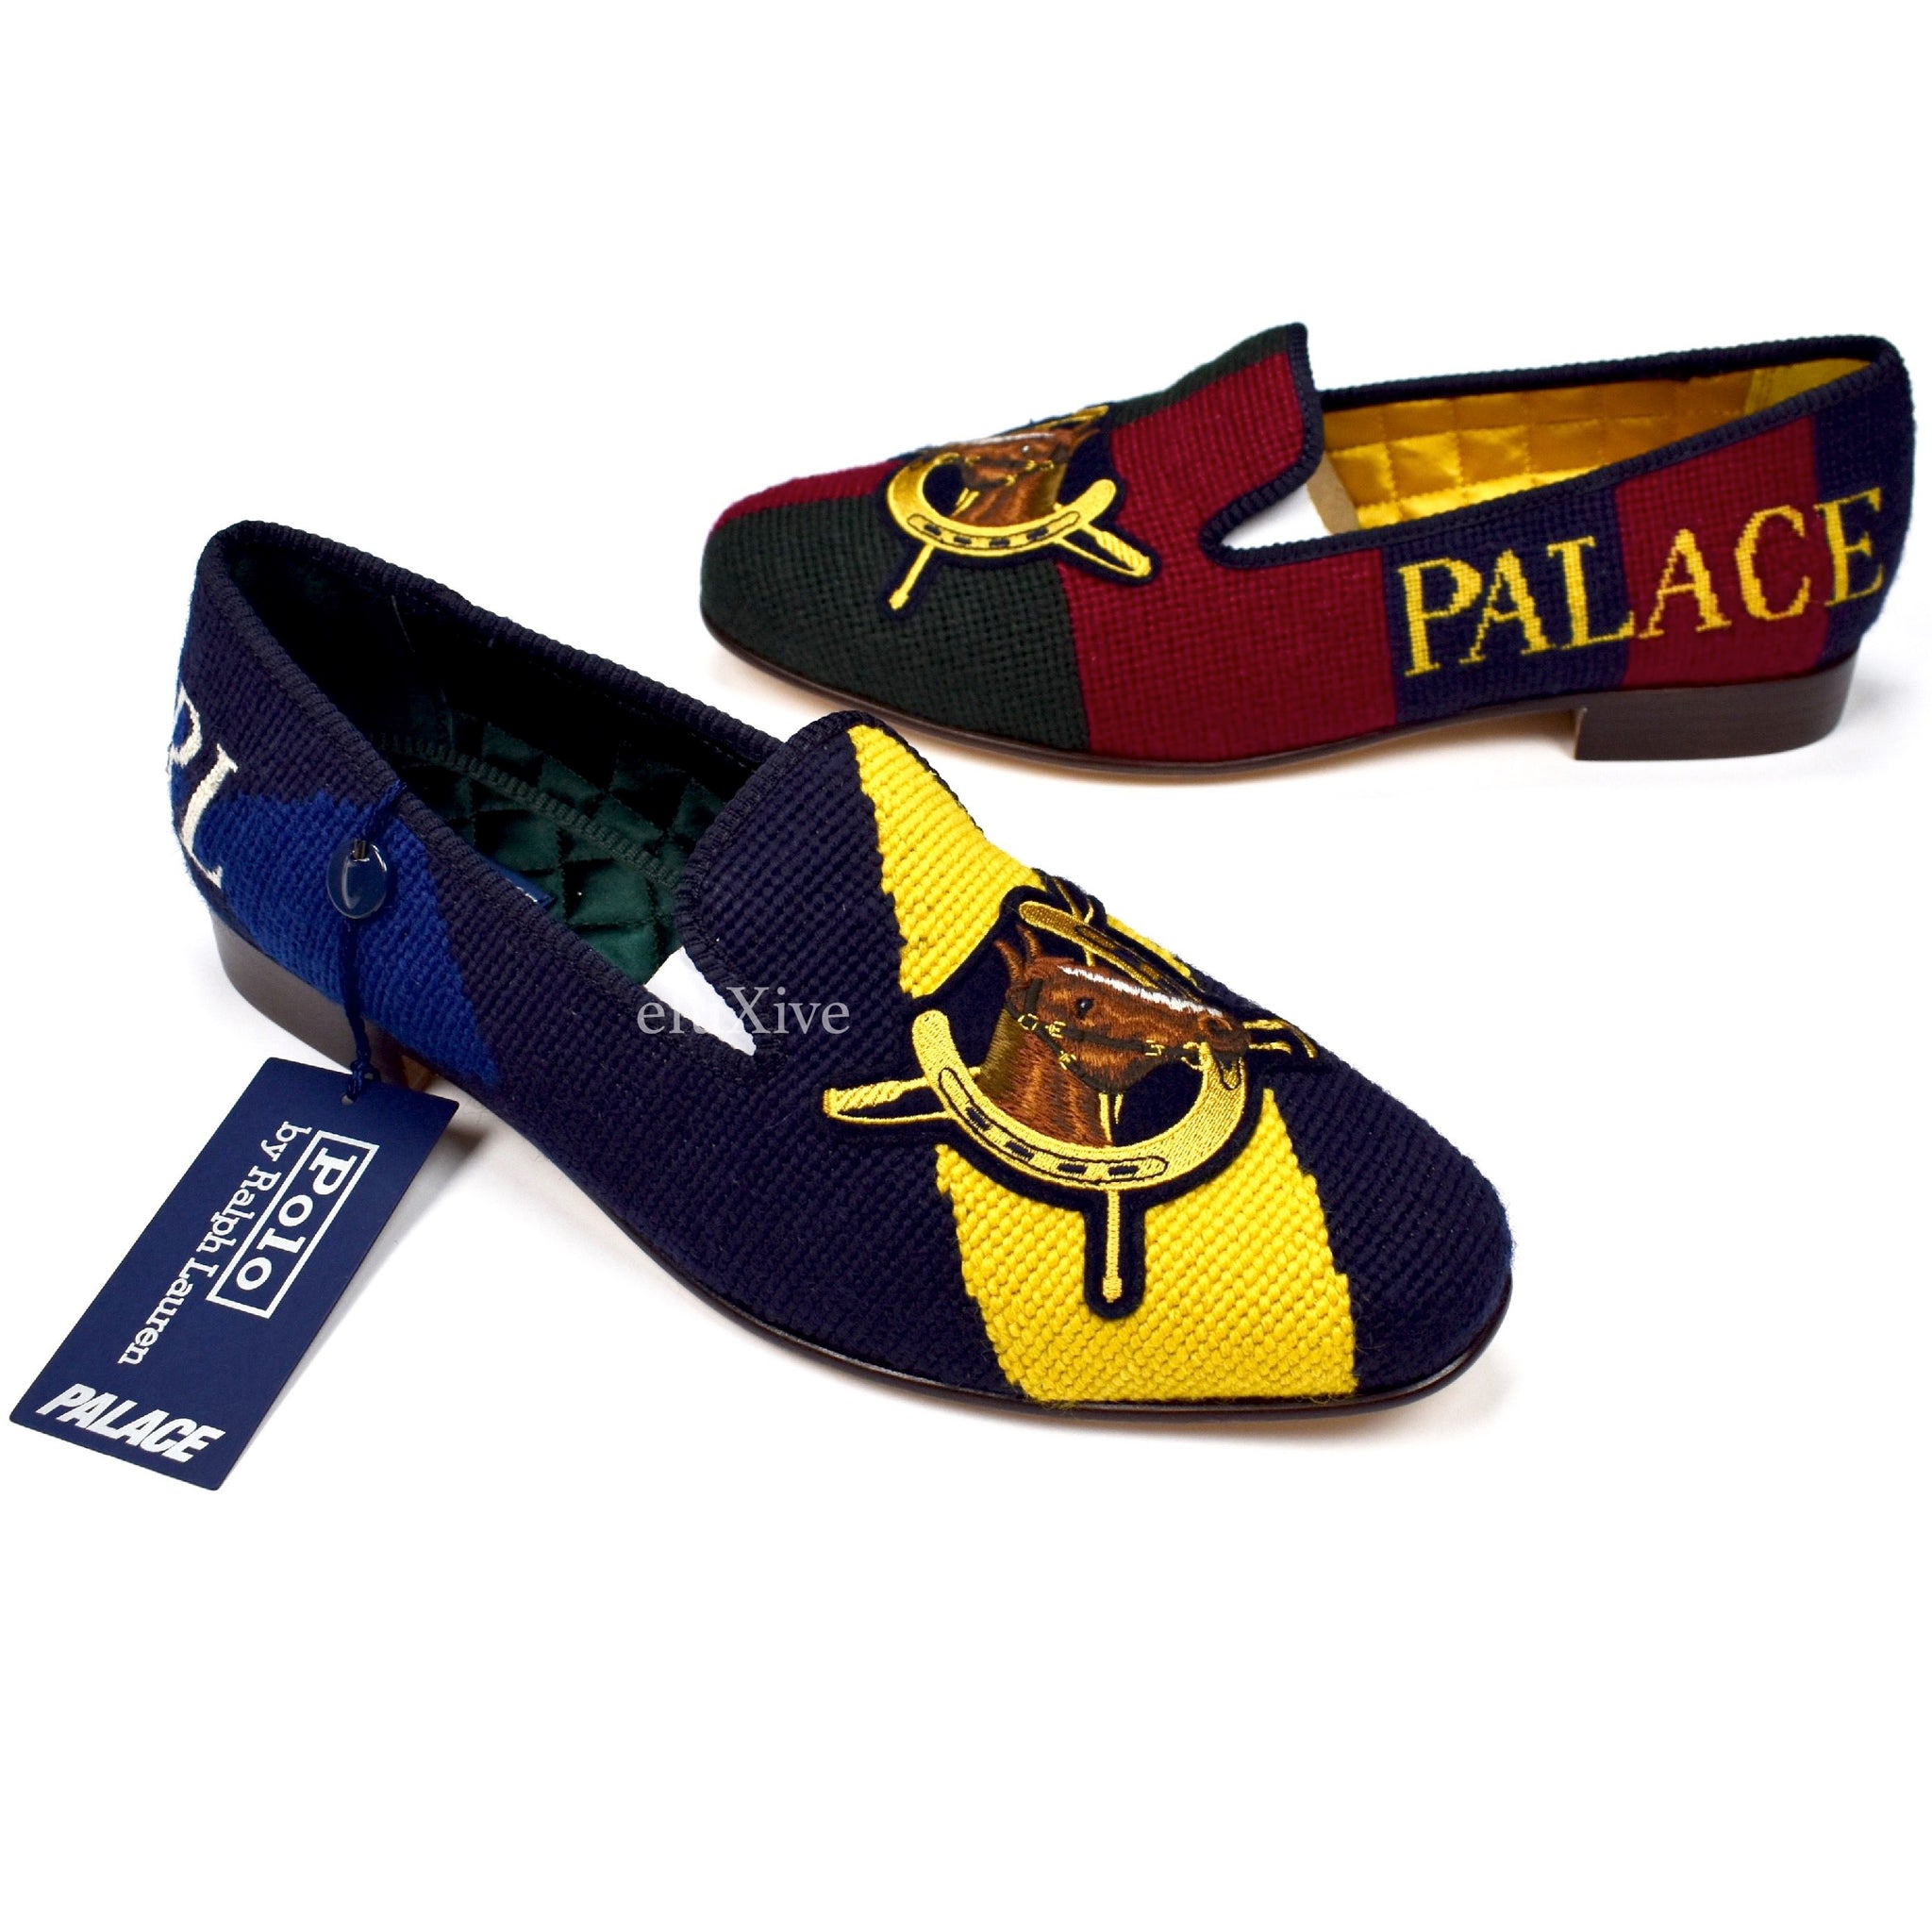 palace polo slippers